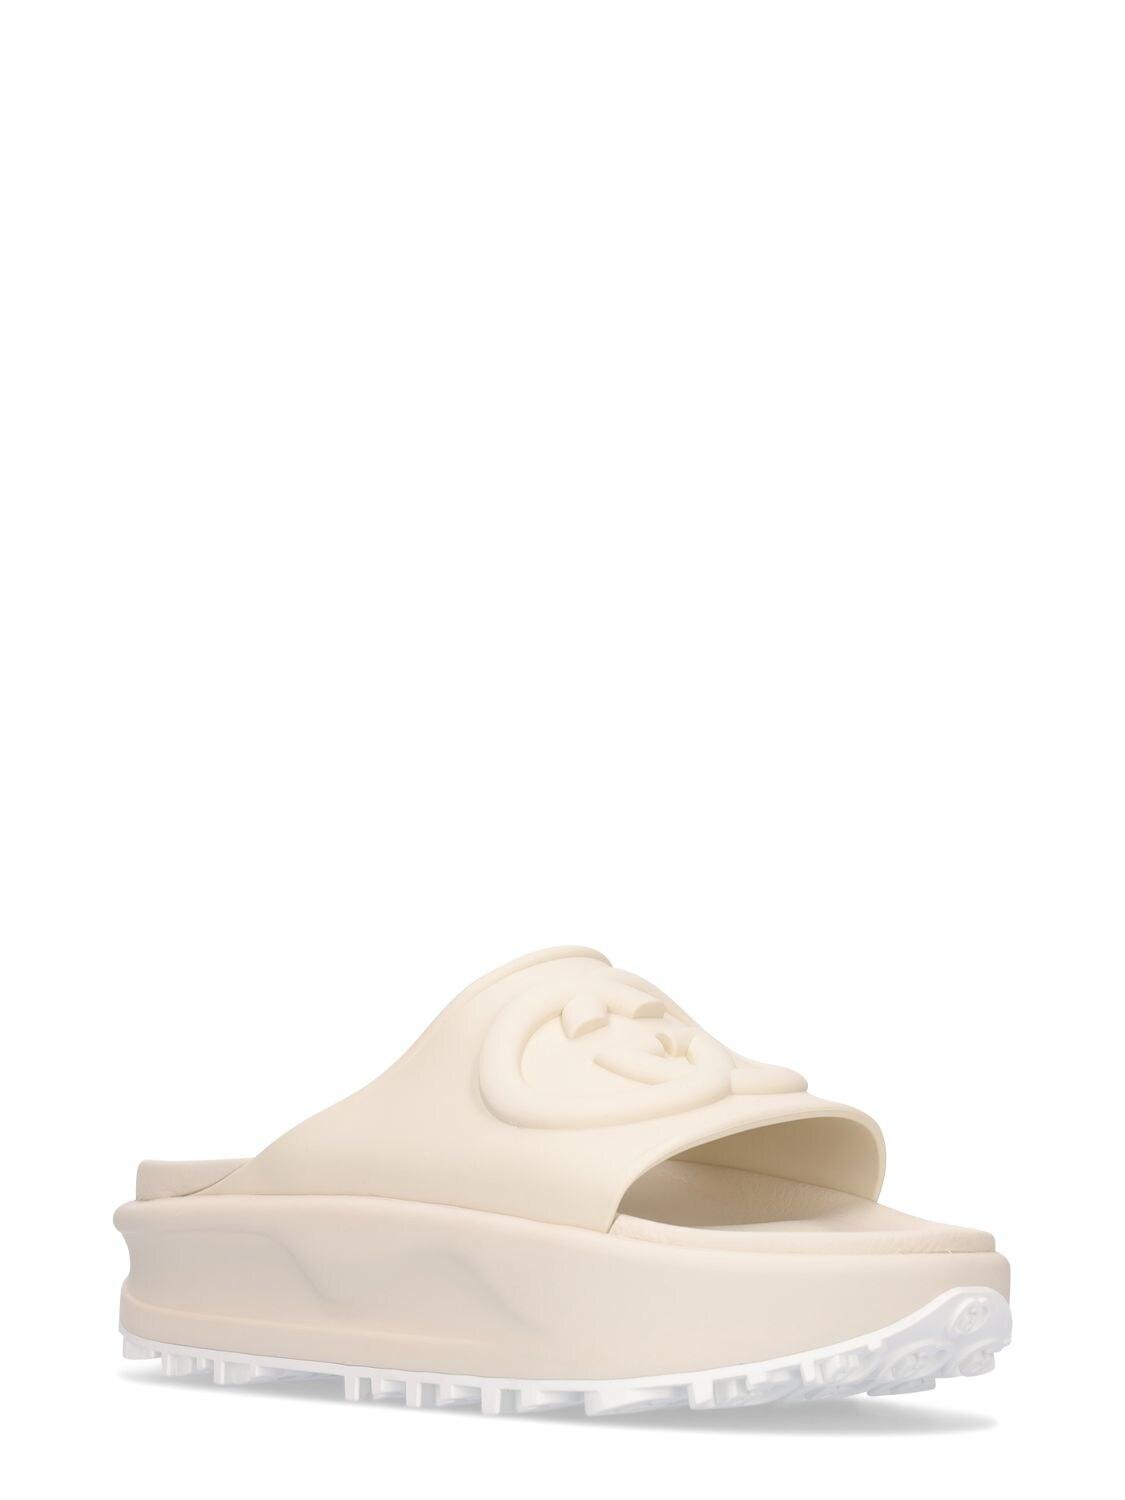 Gucci 40mm Miami Rubber Wedge Sandals in Natural | Lyst